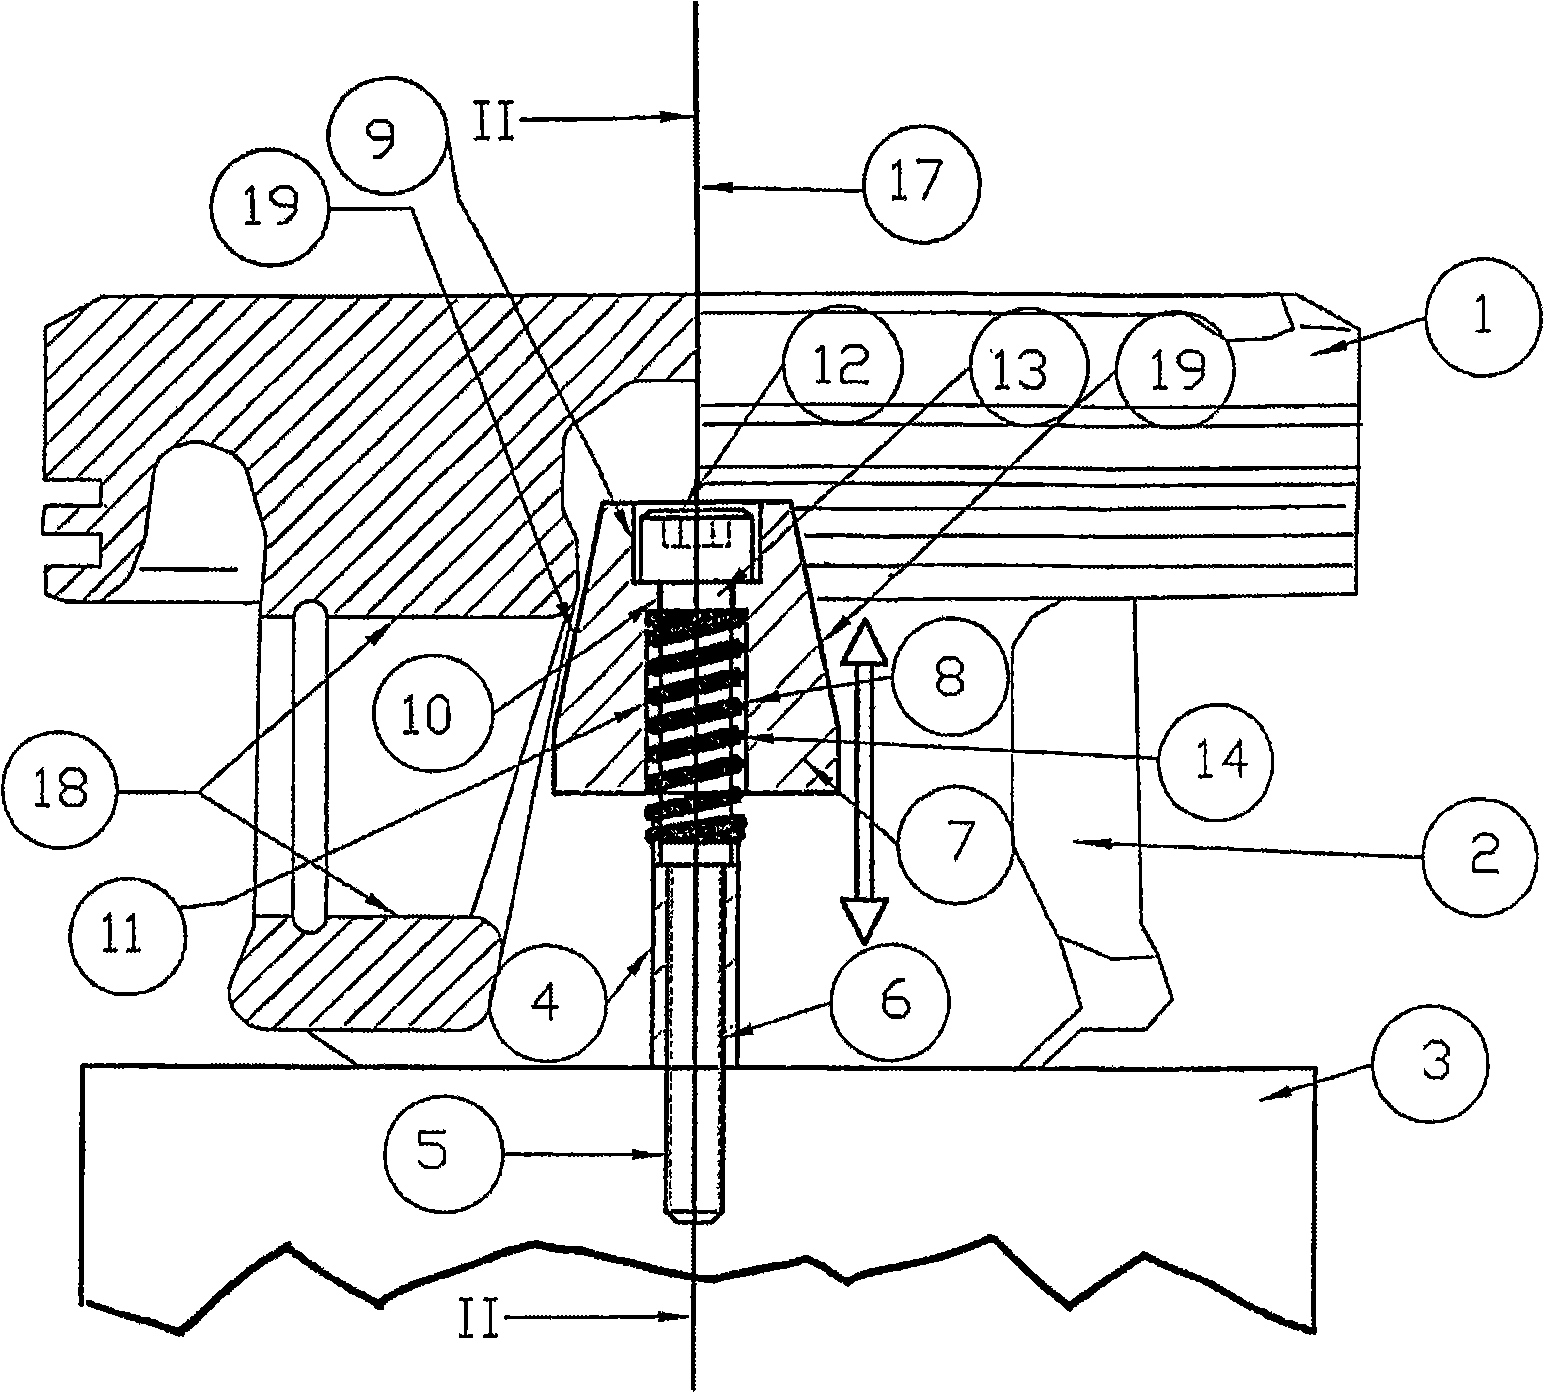 Device for holding a piston in a plant for coating pistons